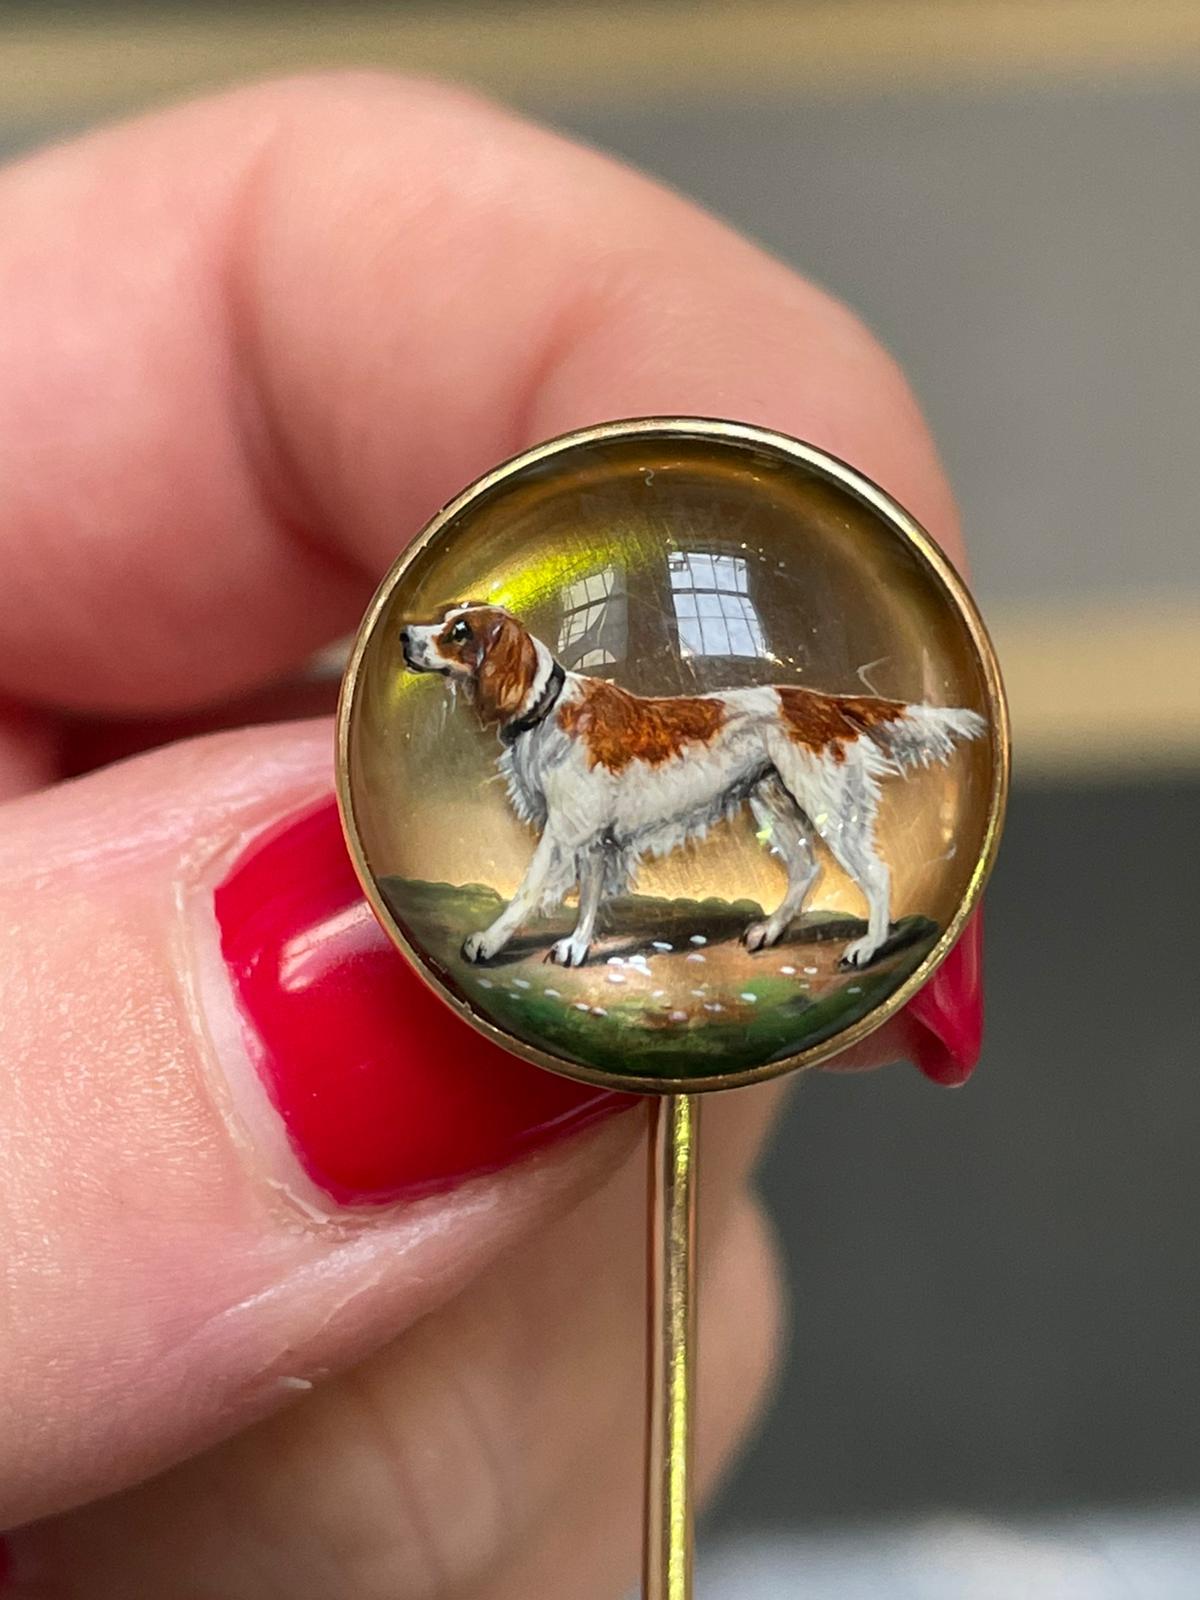 A Victorian Essex Crystal spaniel dog stickpin 18 karat yellow gold.

This charming pin features a domed crystal with an exquisite collie dog scene. The white dog displays brown patches and wears a mahogany coloured collar. It stands on green